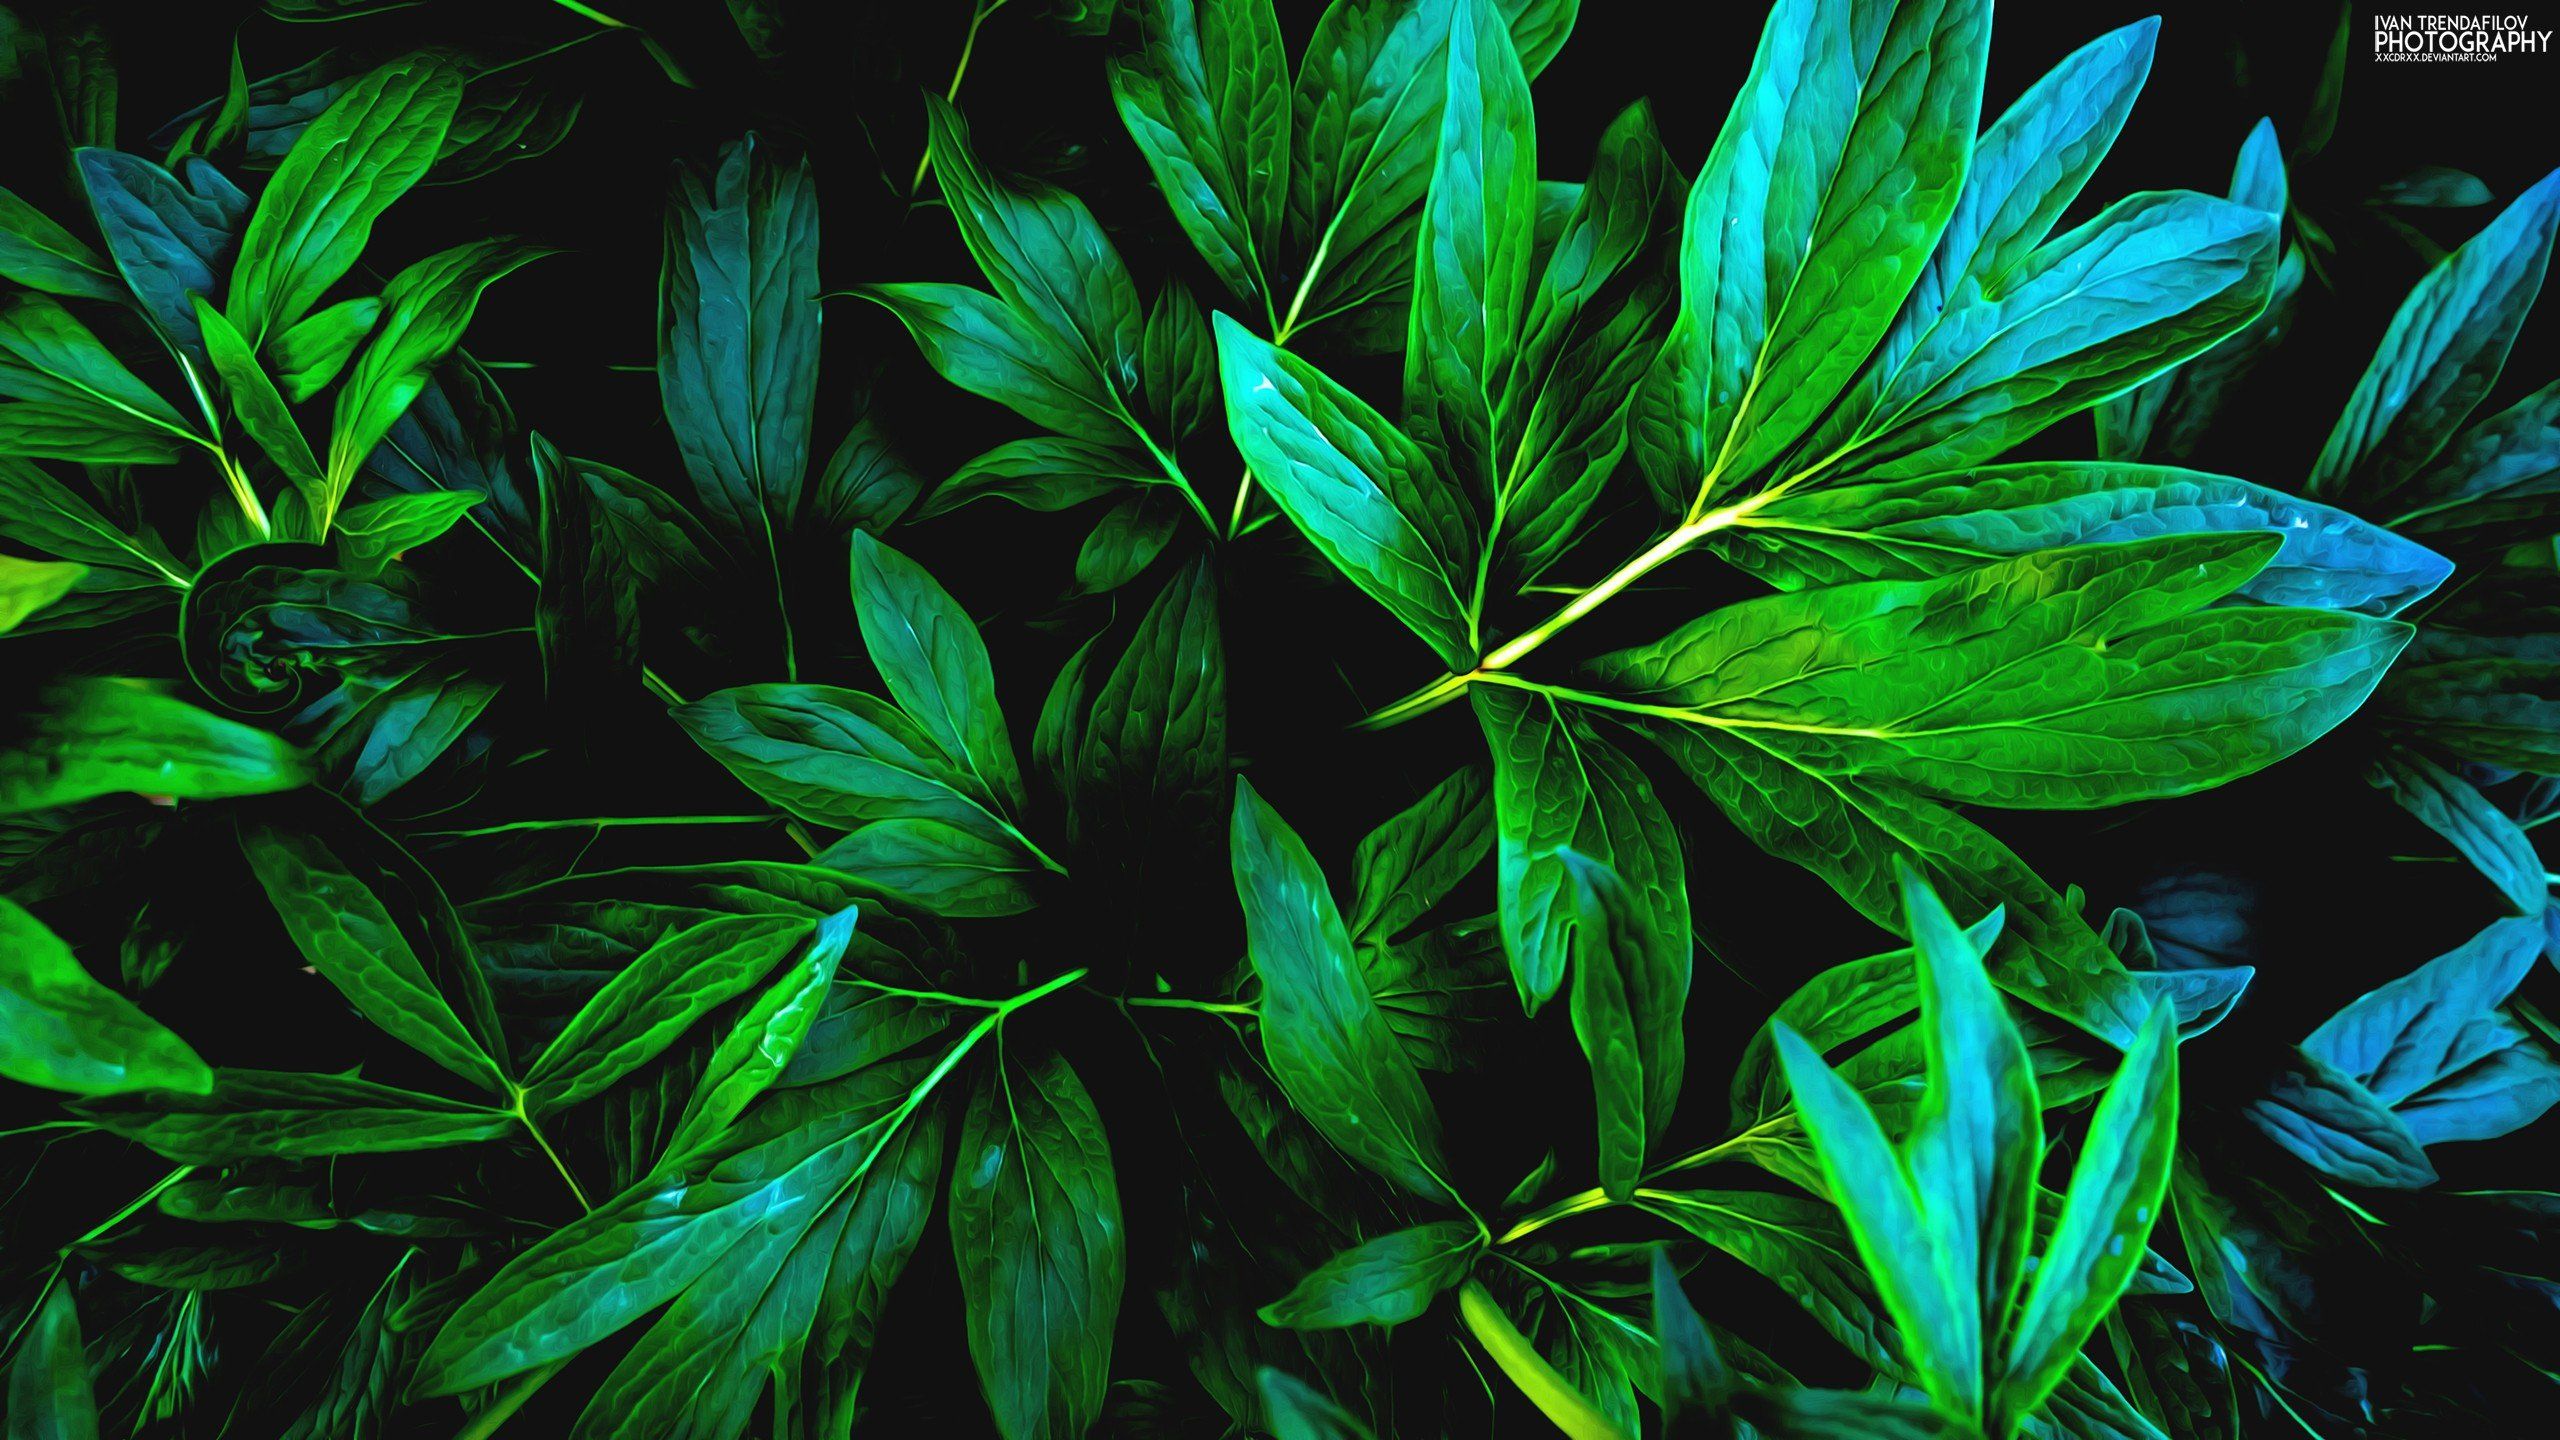 Wallpaper, 2560x1440 px, green, leaves, nature, plants, shadow 2560x1440